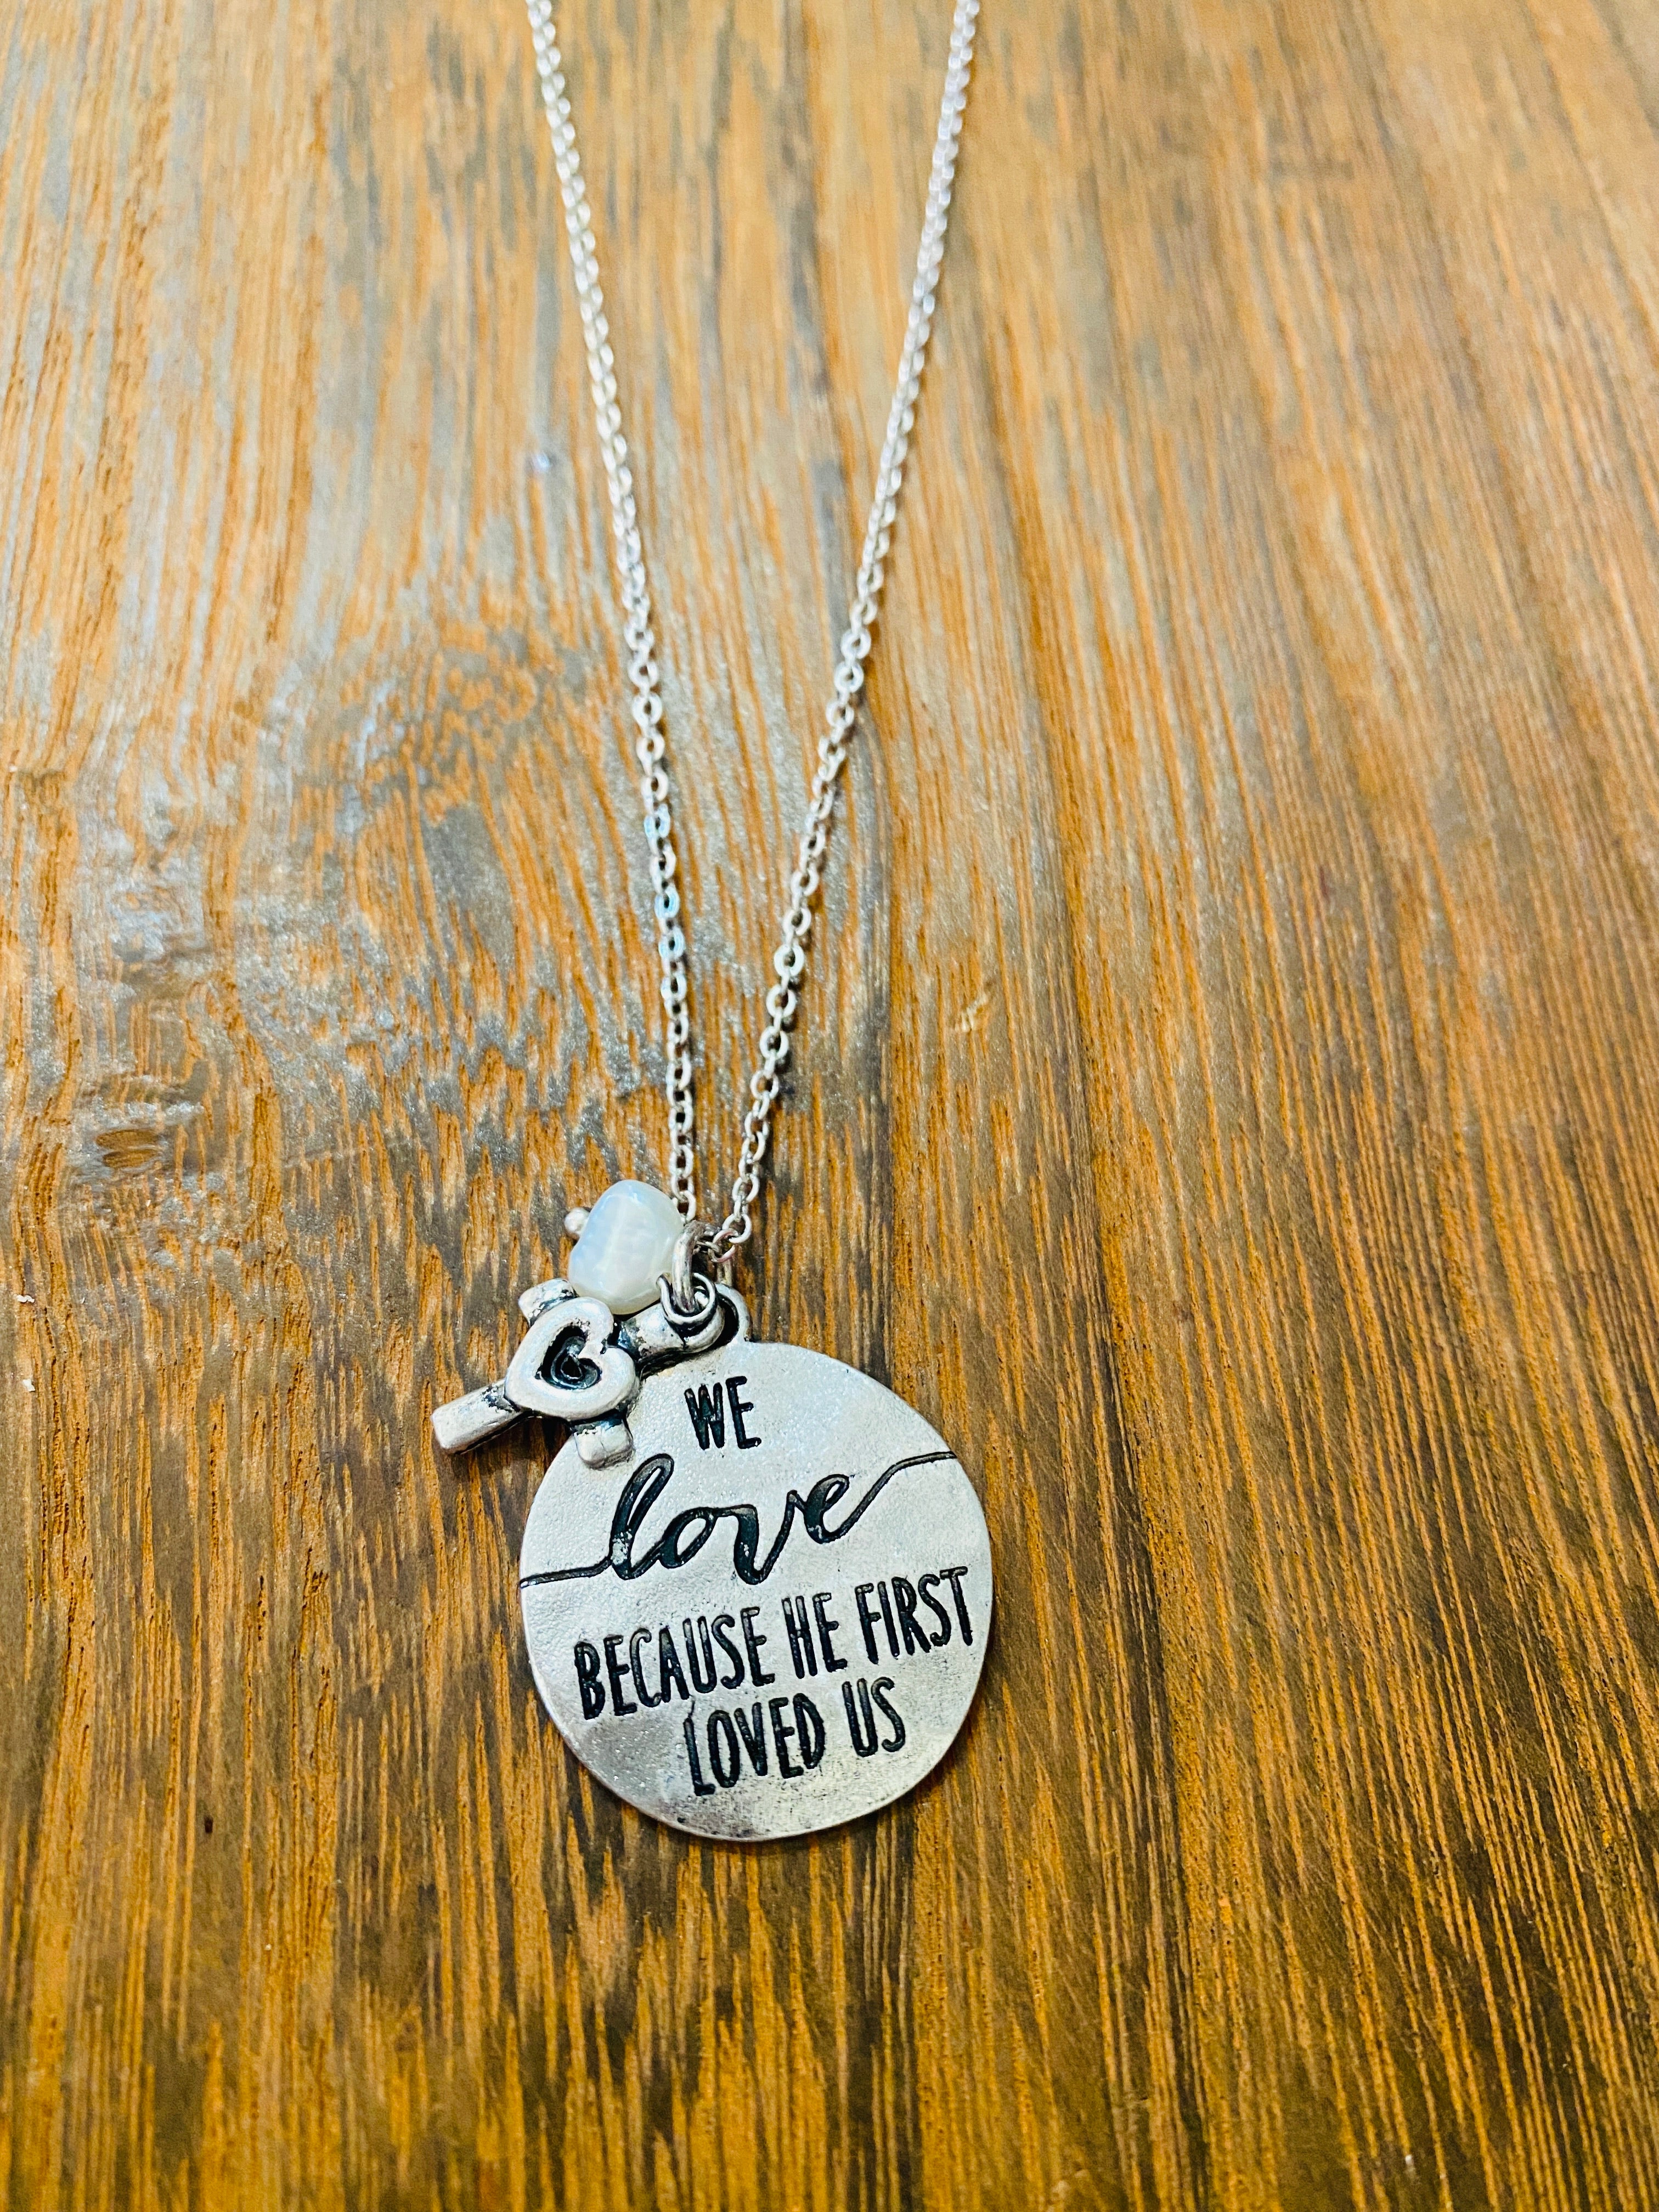 We Love Because He First Loved Us Silver Or Gold Toned Charm Necklace